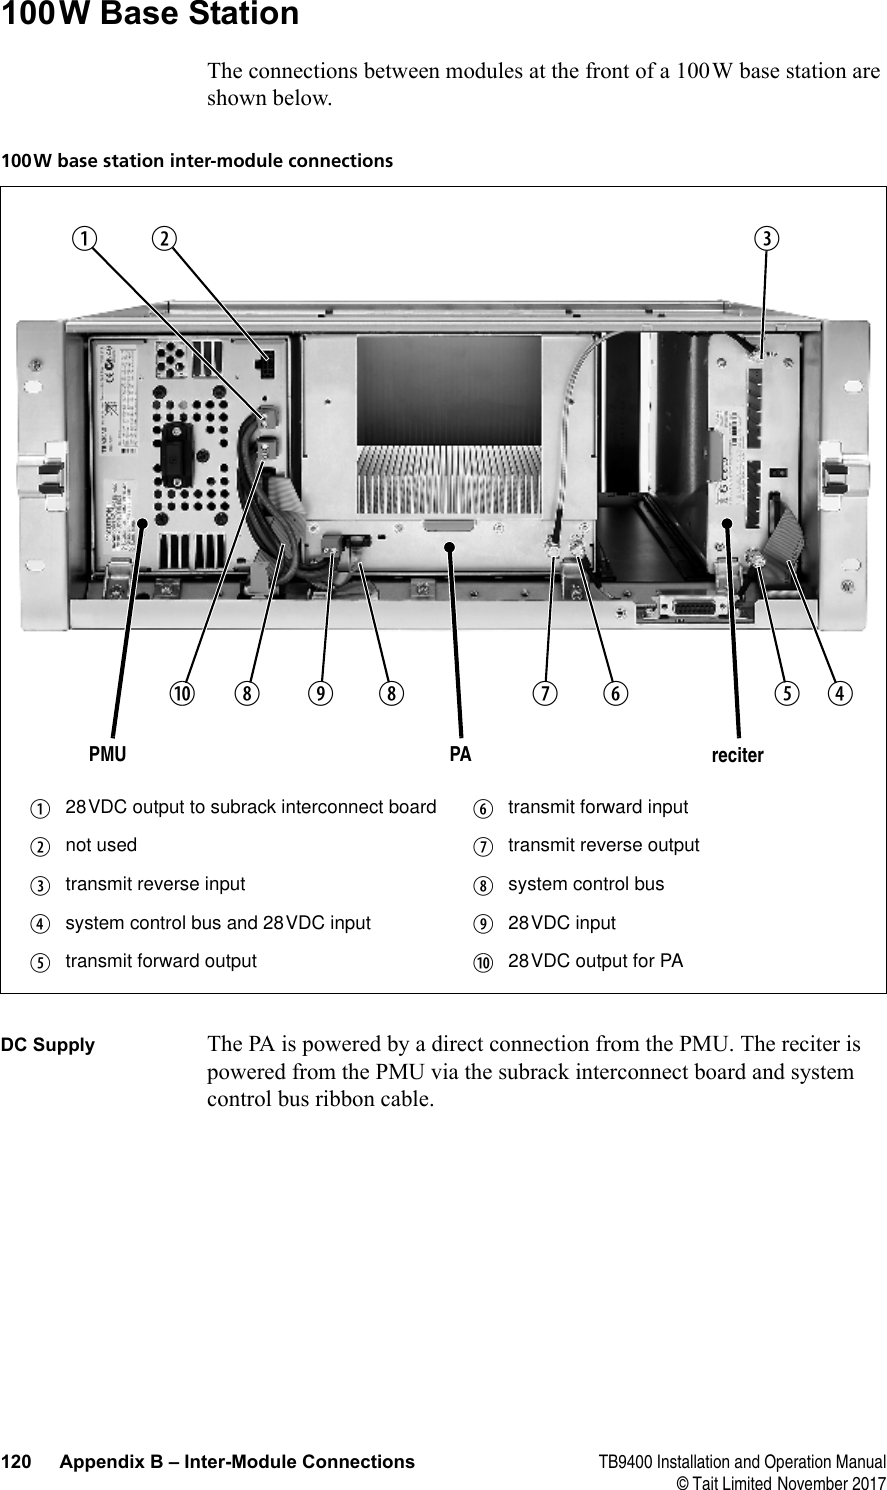  120 Appendix B – Inter-Module Connections TB9400 Installation and Operation Manual© Tait Limited November 2017100W Base StationThe connections between modules at the front of a 100W base station are shown below.DC Supply The PA is powered by a direct connection from the PMU. The reciter is powered from the PMU via the subrack interconnect board and system control bus ribbon cable.100W base station inter-module connectionsb28VDC output to subrack interconnect board gtransmit forward inputcnot used htransmit reverse outputdtransmit reverse input isystem control busesystem control bus and 28VDC input j28VDC inputftransmit forward output 1) 28VDC output for PAPMU reciterPAbijhdefgi1)c